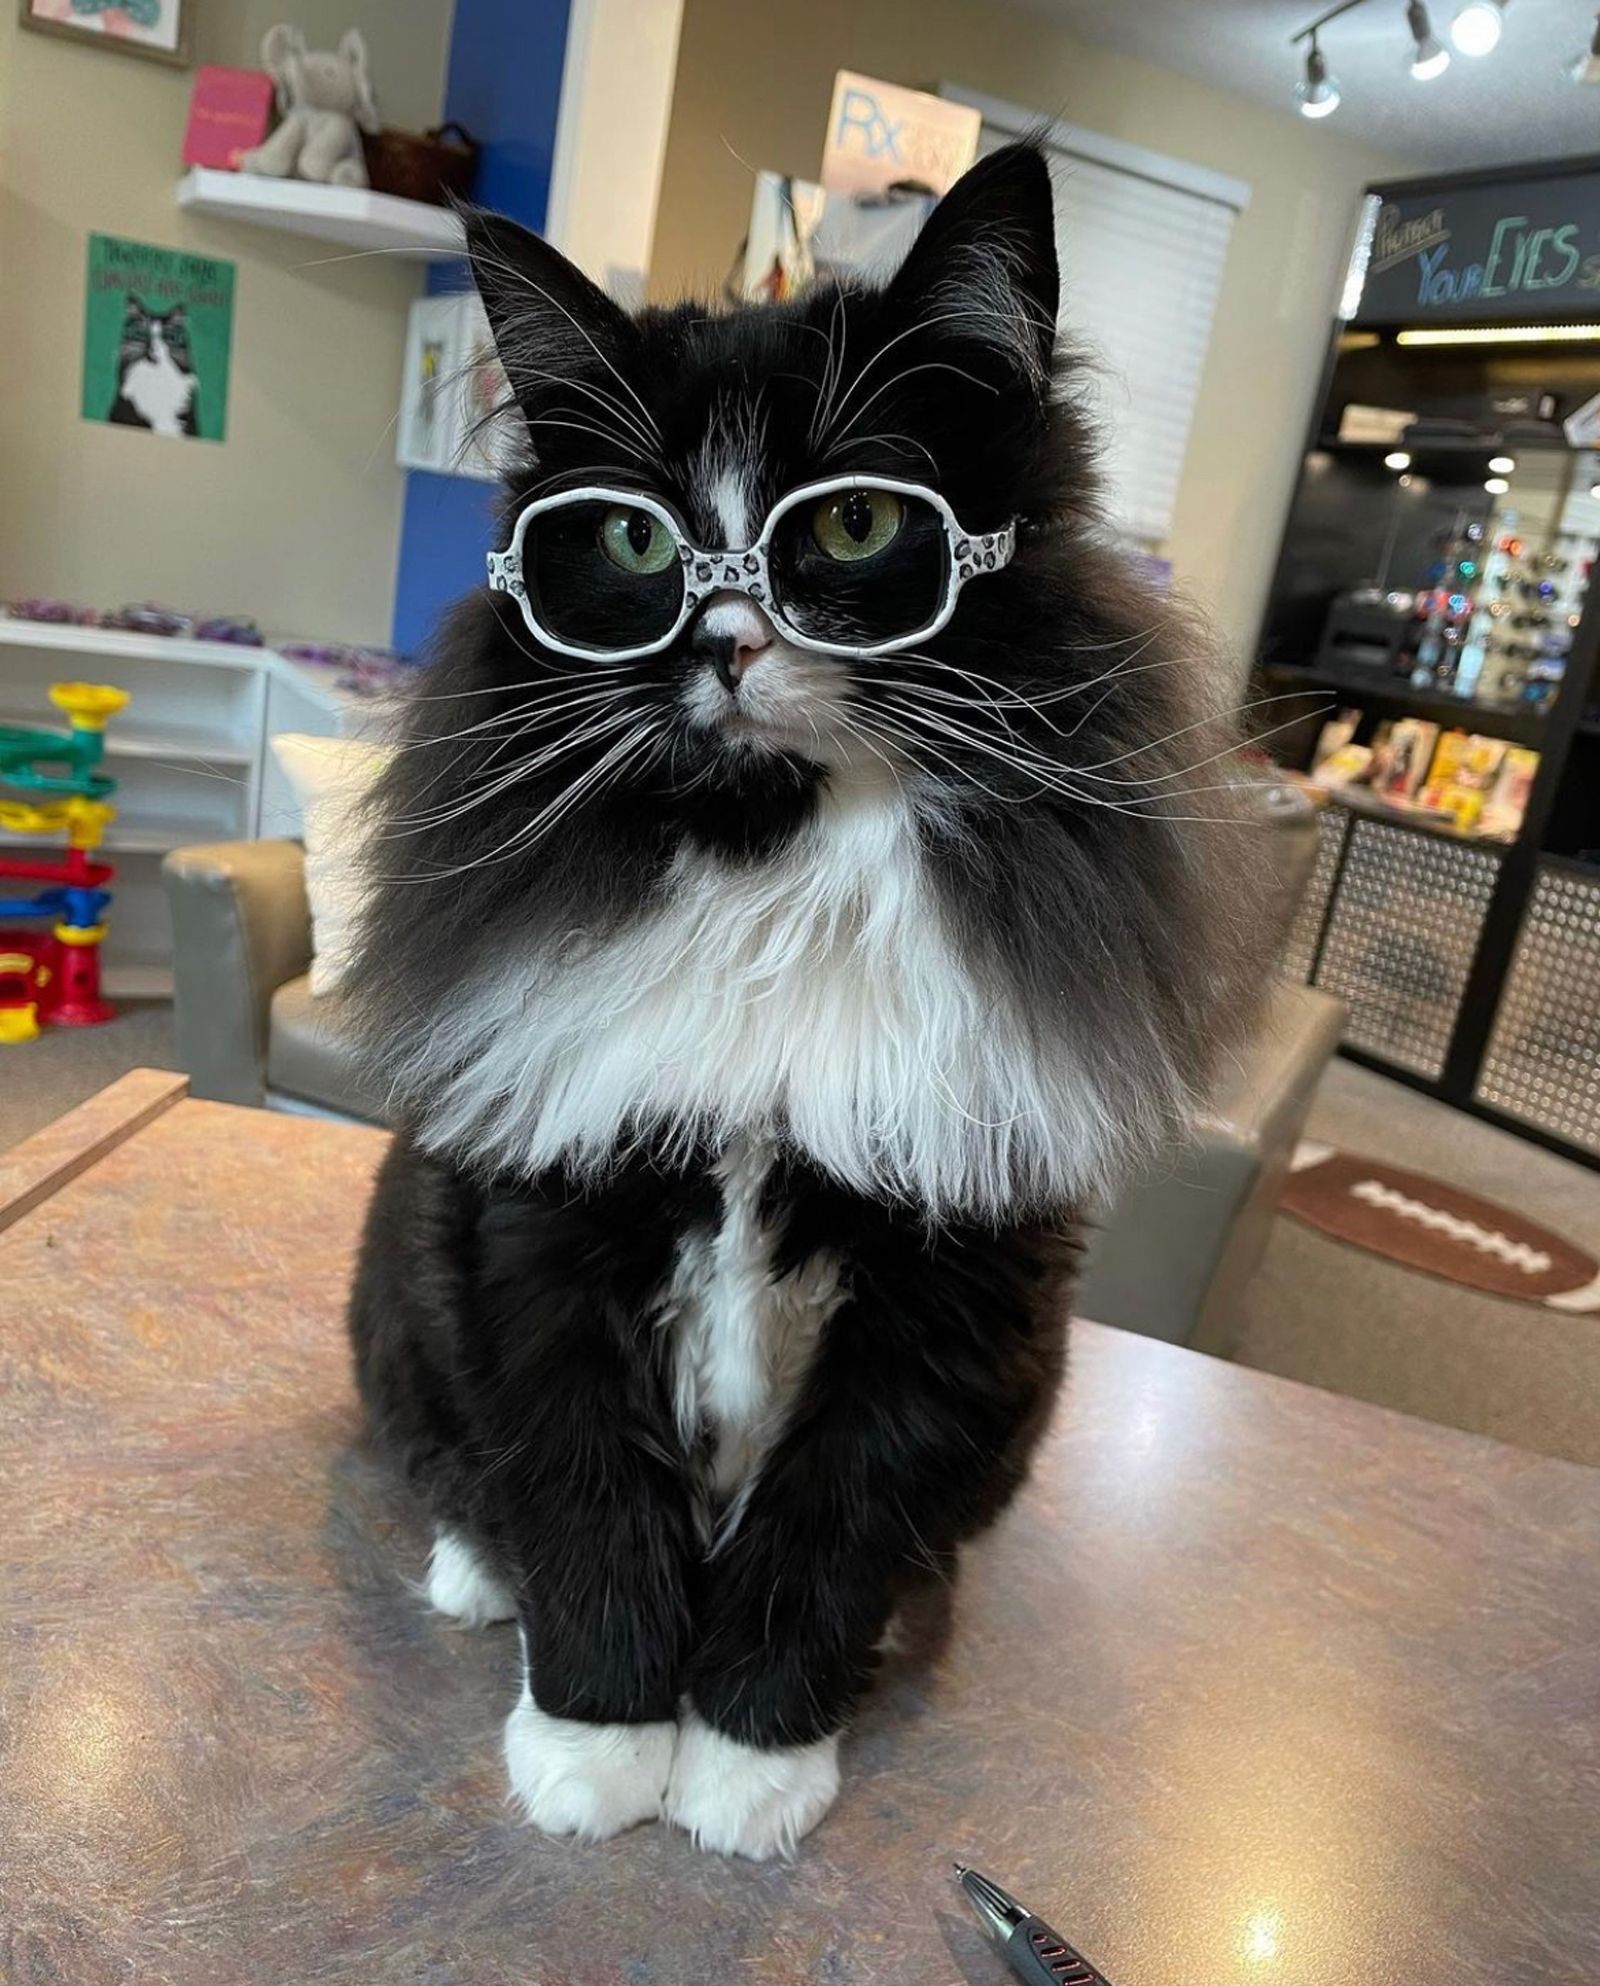 Meet Truffles, the special kitty who wears glasses to help kids